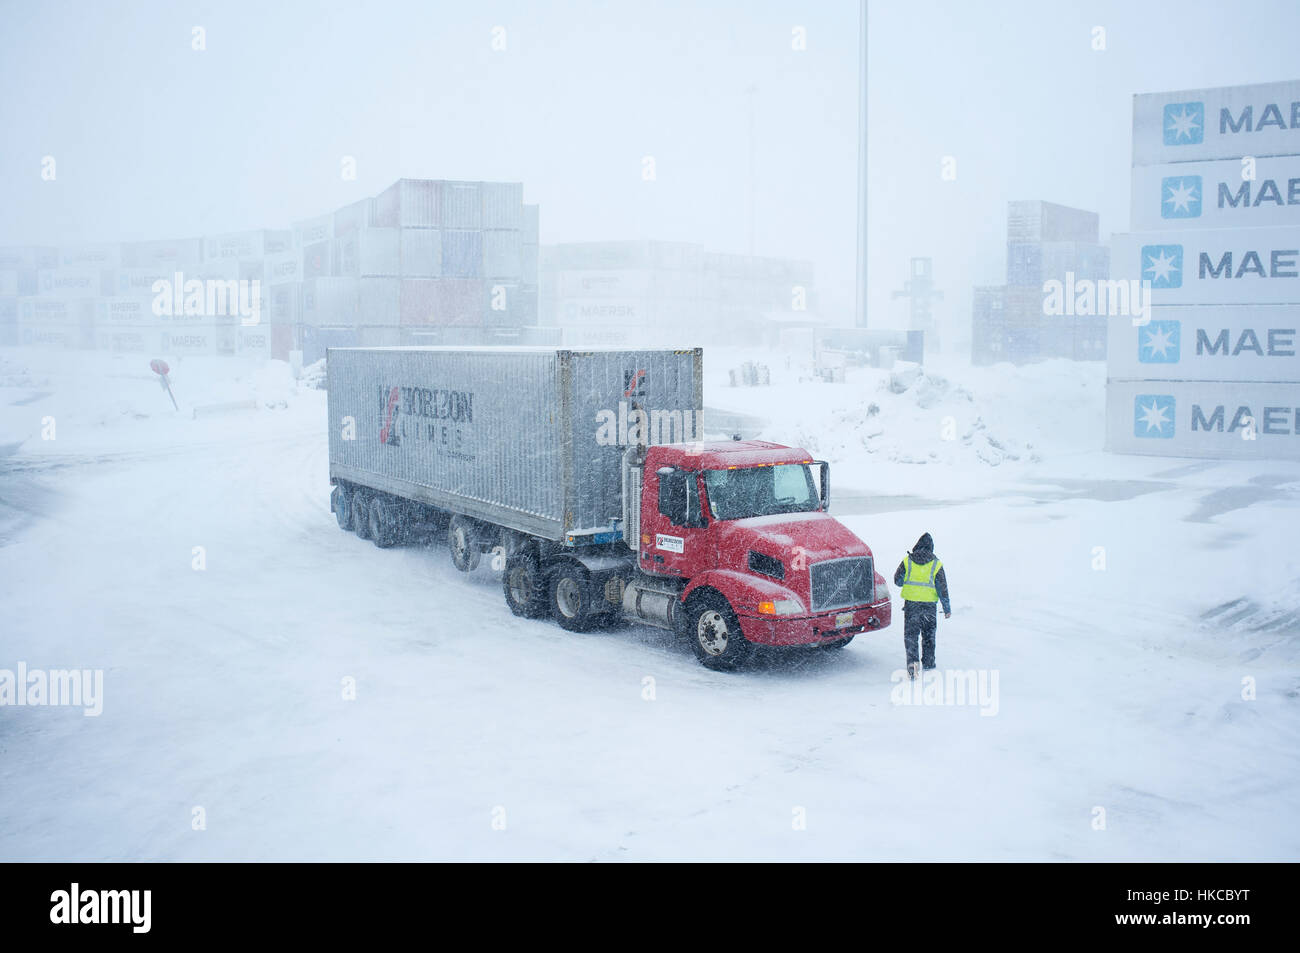 A driver walks to his Horizon Lines truck in the container yard during a snowstorm, Unalaska, Southwest Alaska, USA Stock Photo